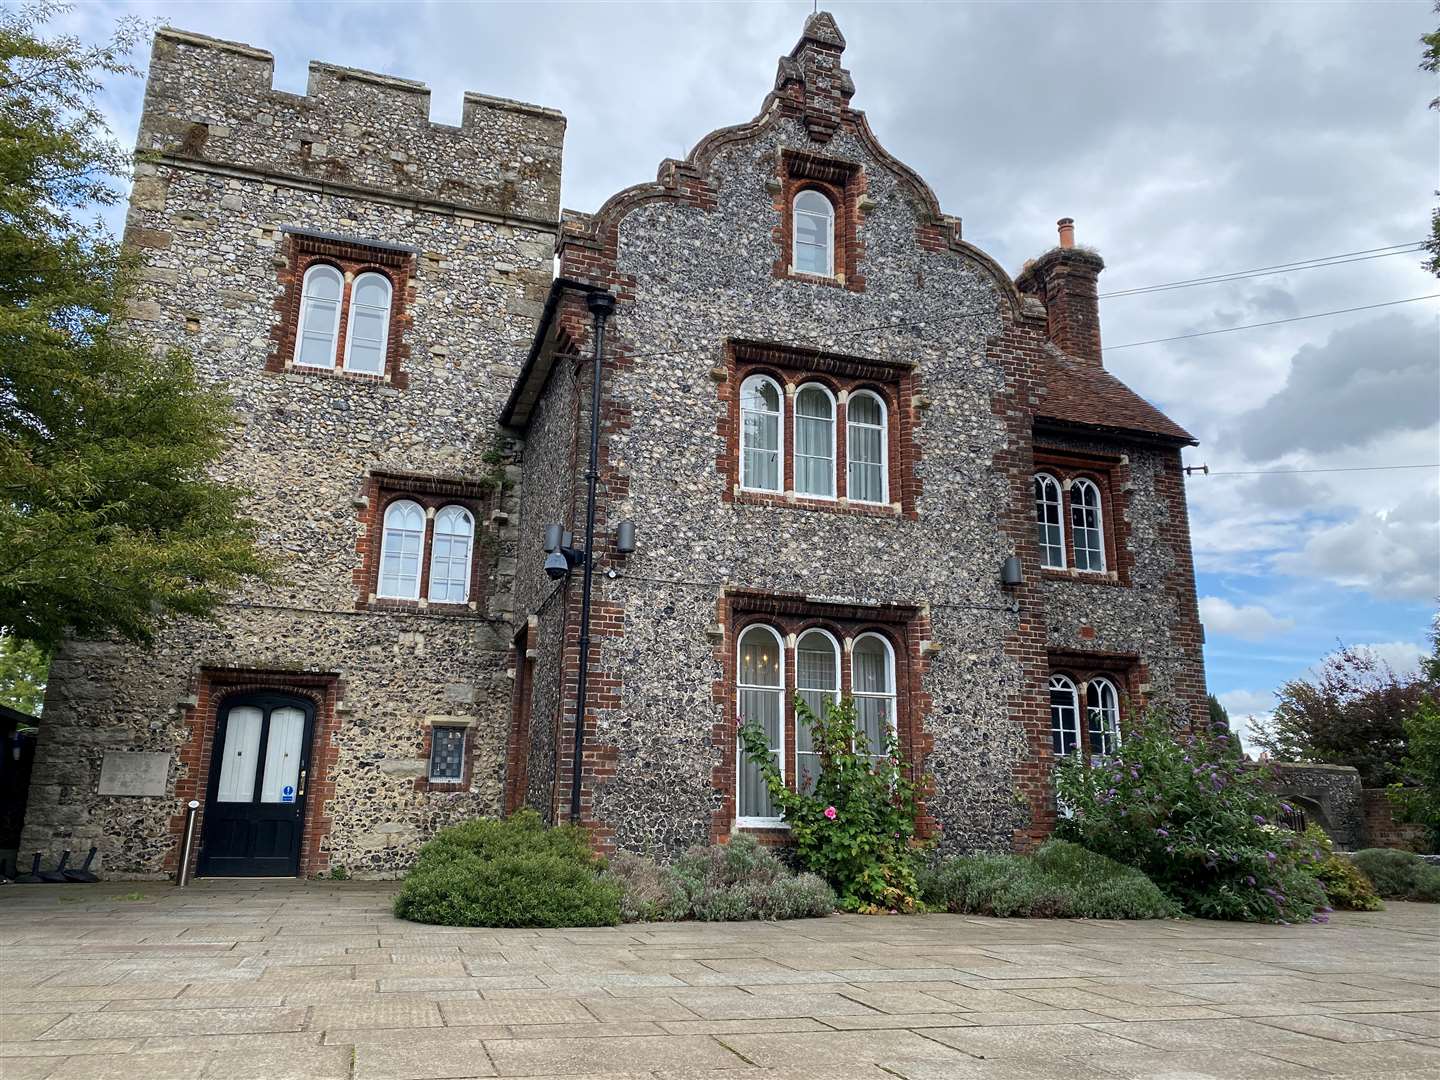 Tower House will no longer be used for wedding ceremonies